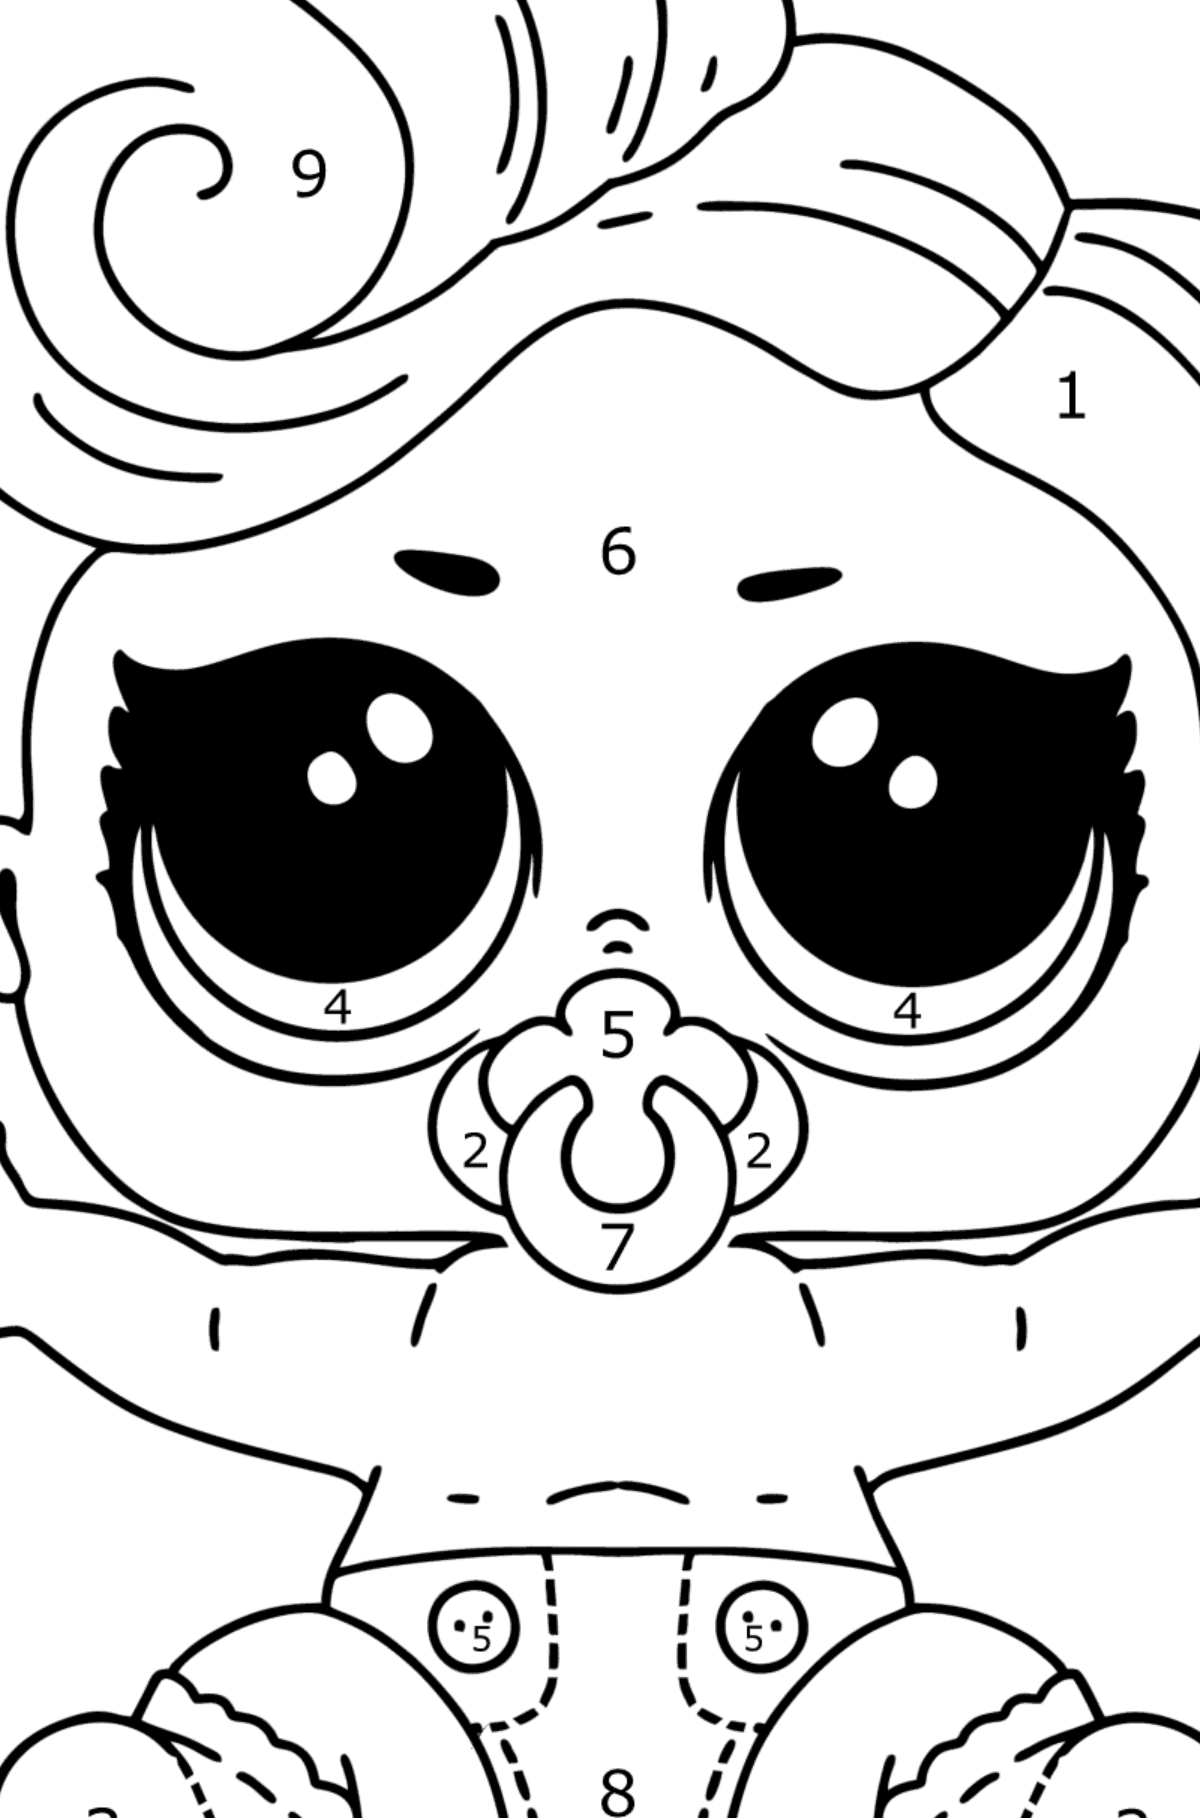 Coloring page LOL LIL Lux - Coloring by Numbers for Kids